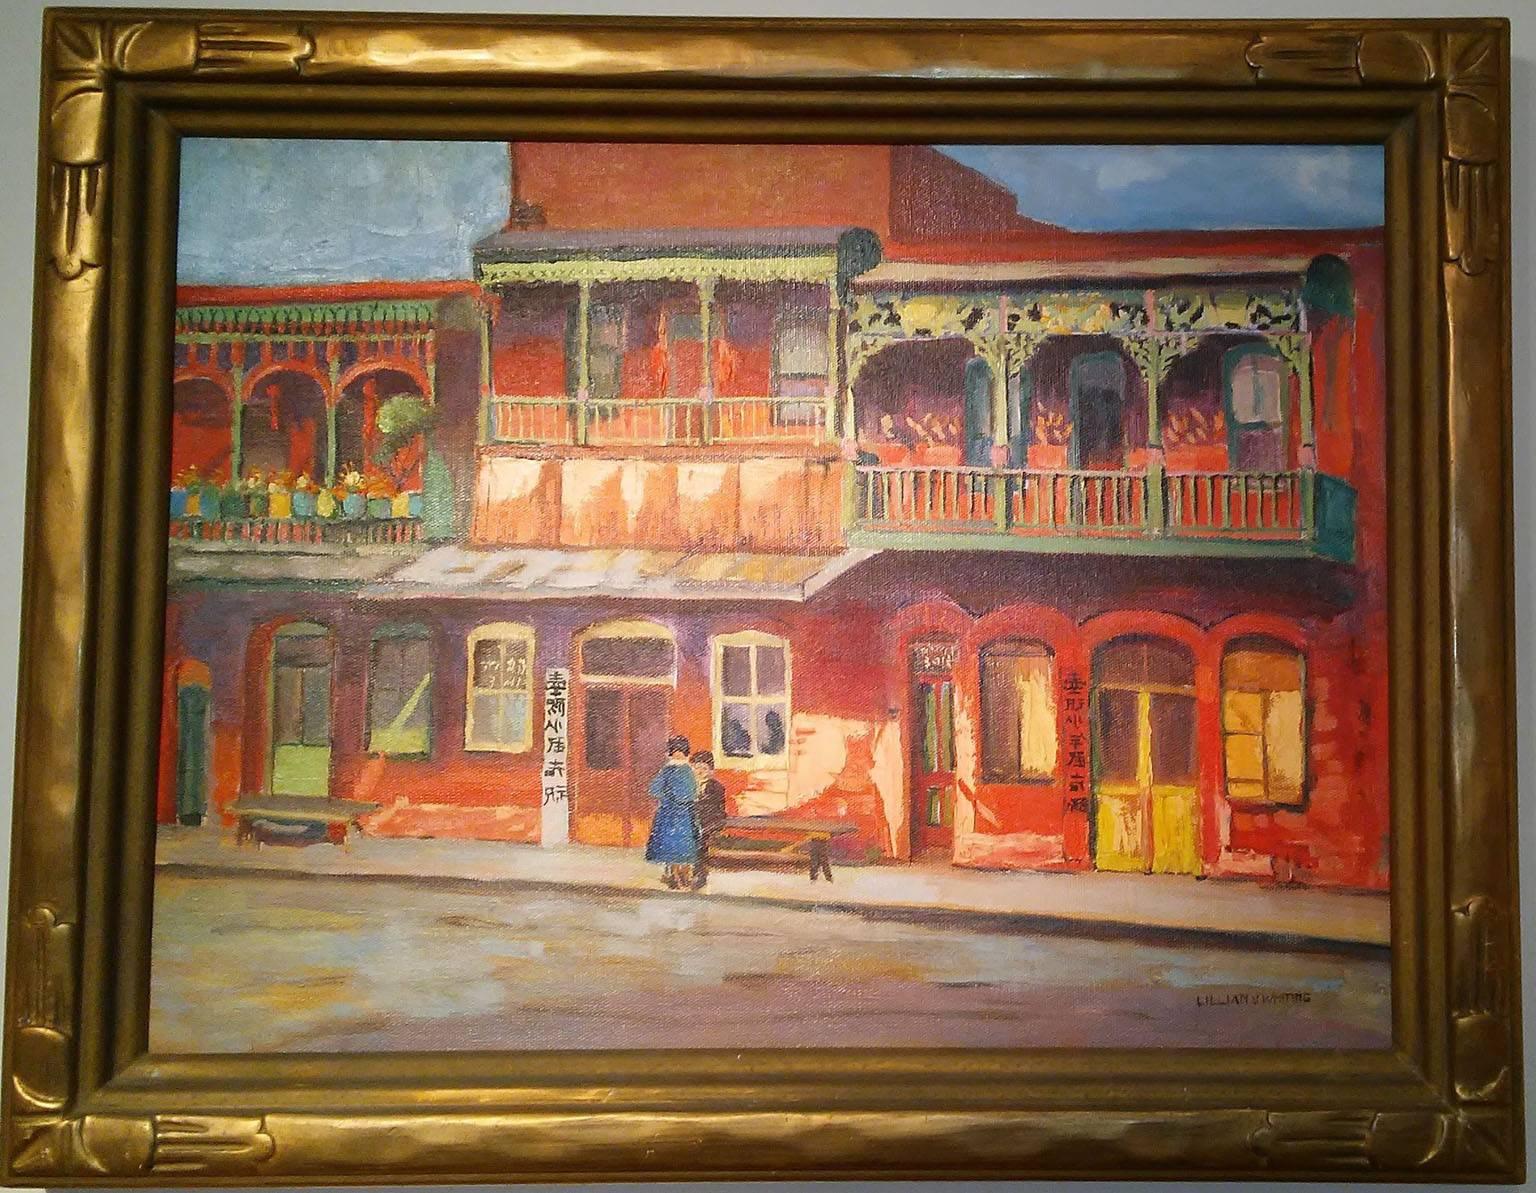 Chinatown, Los Angeles - Painting by Lillian Whiting